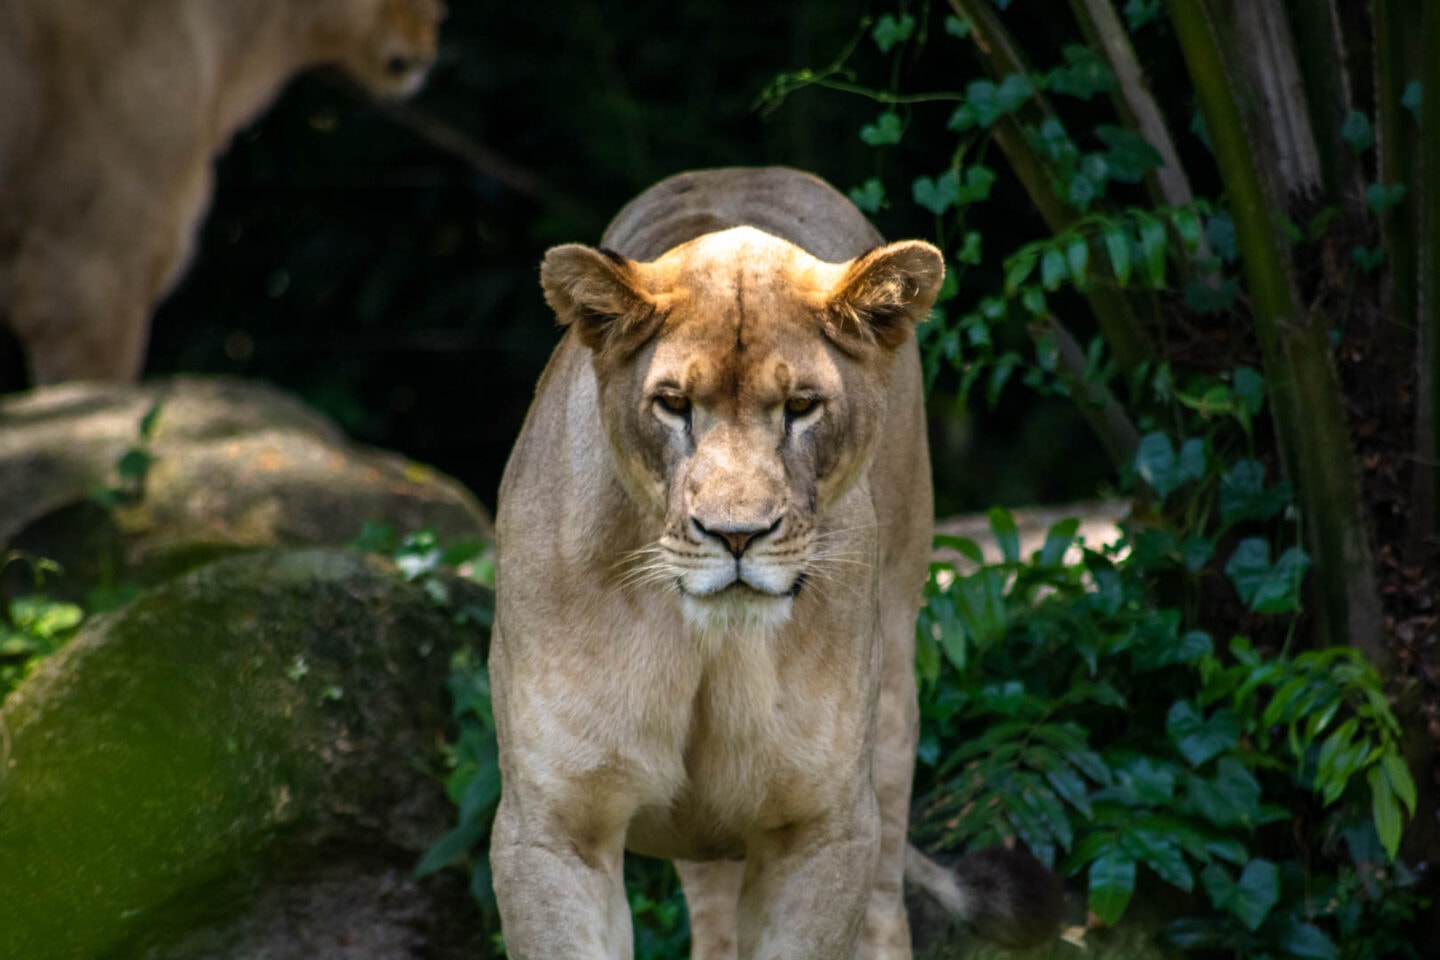 Lioness at Singapore Zoo